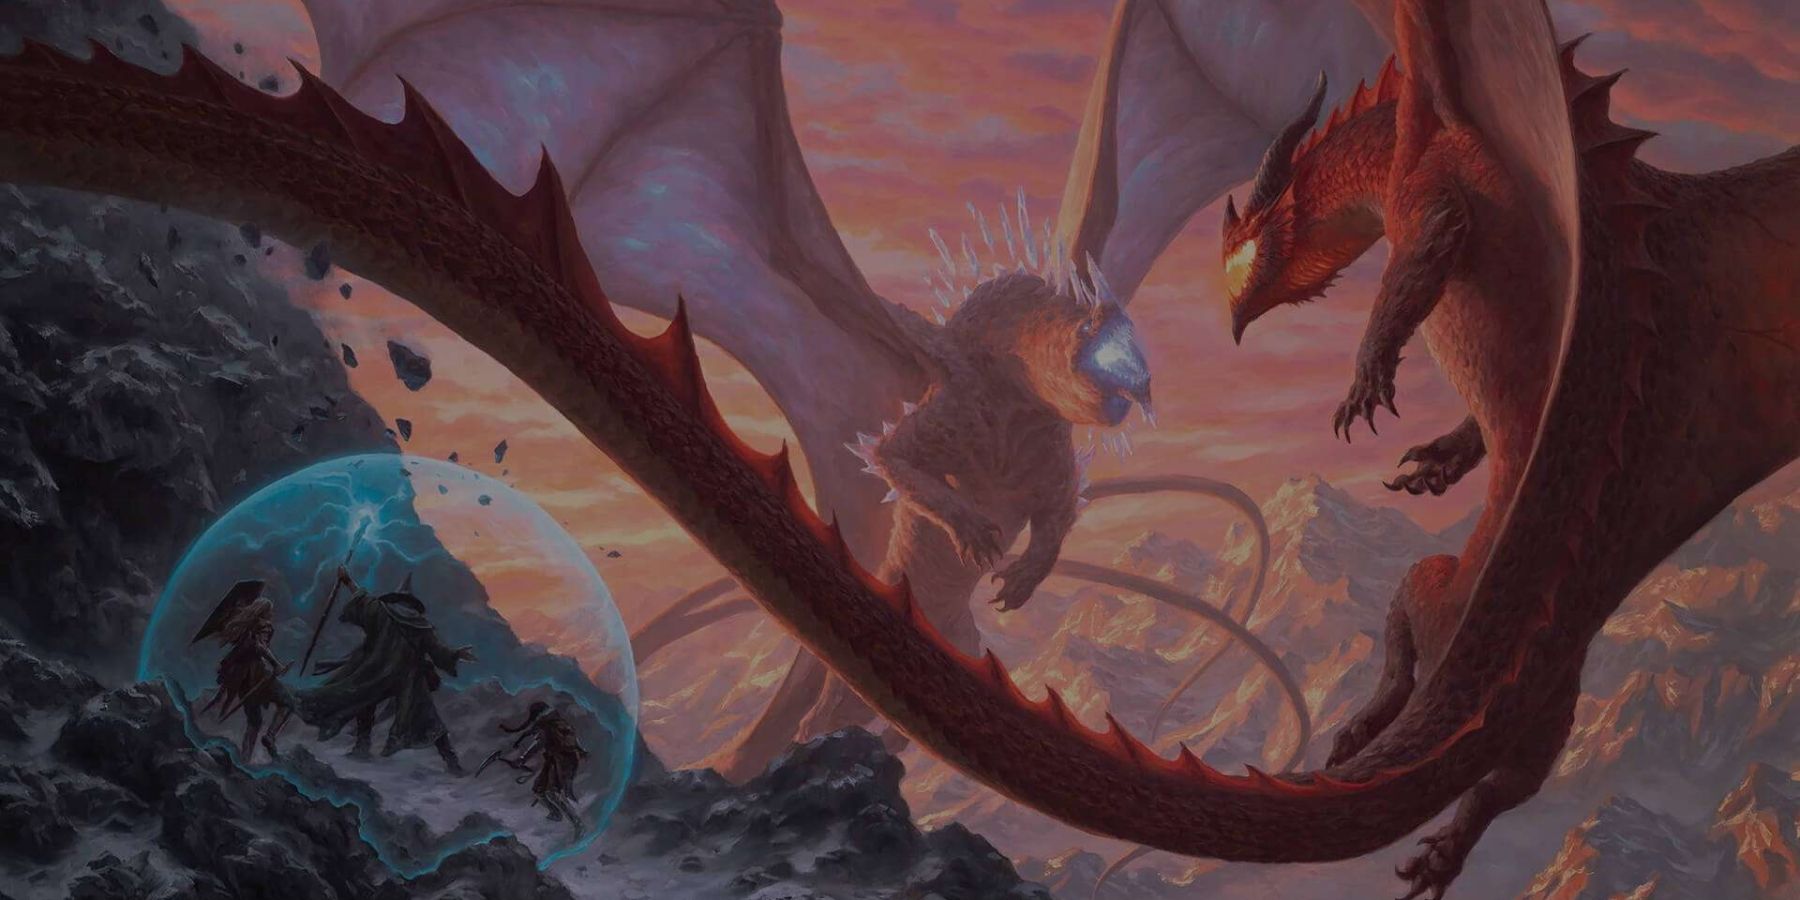 Official art for Dungeons and Dragons showing two dragons fighting and an adventuring party protected by a barrier